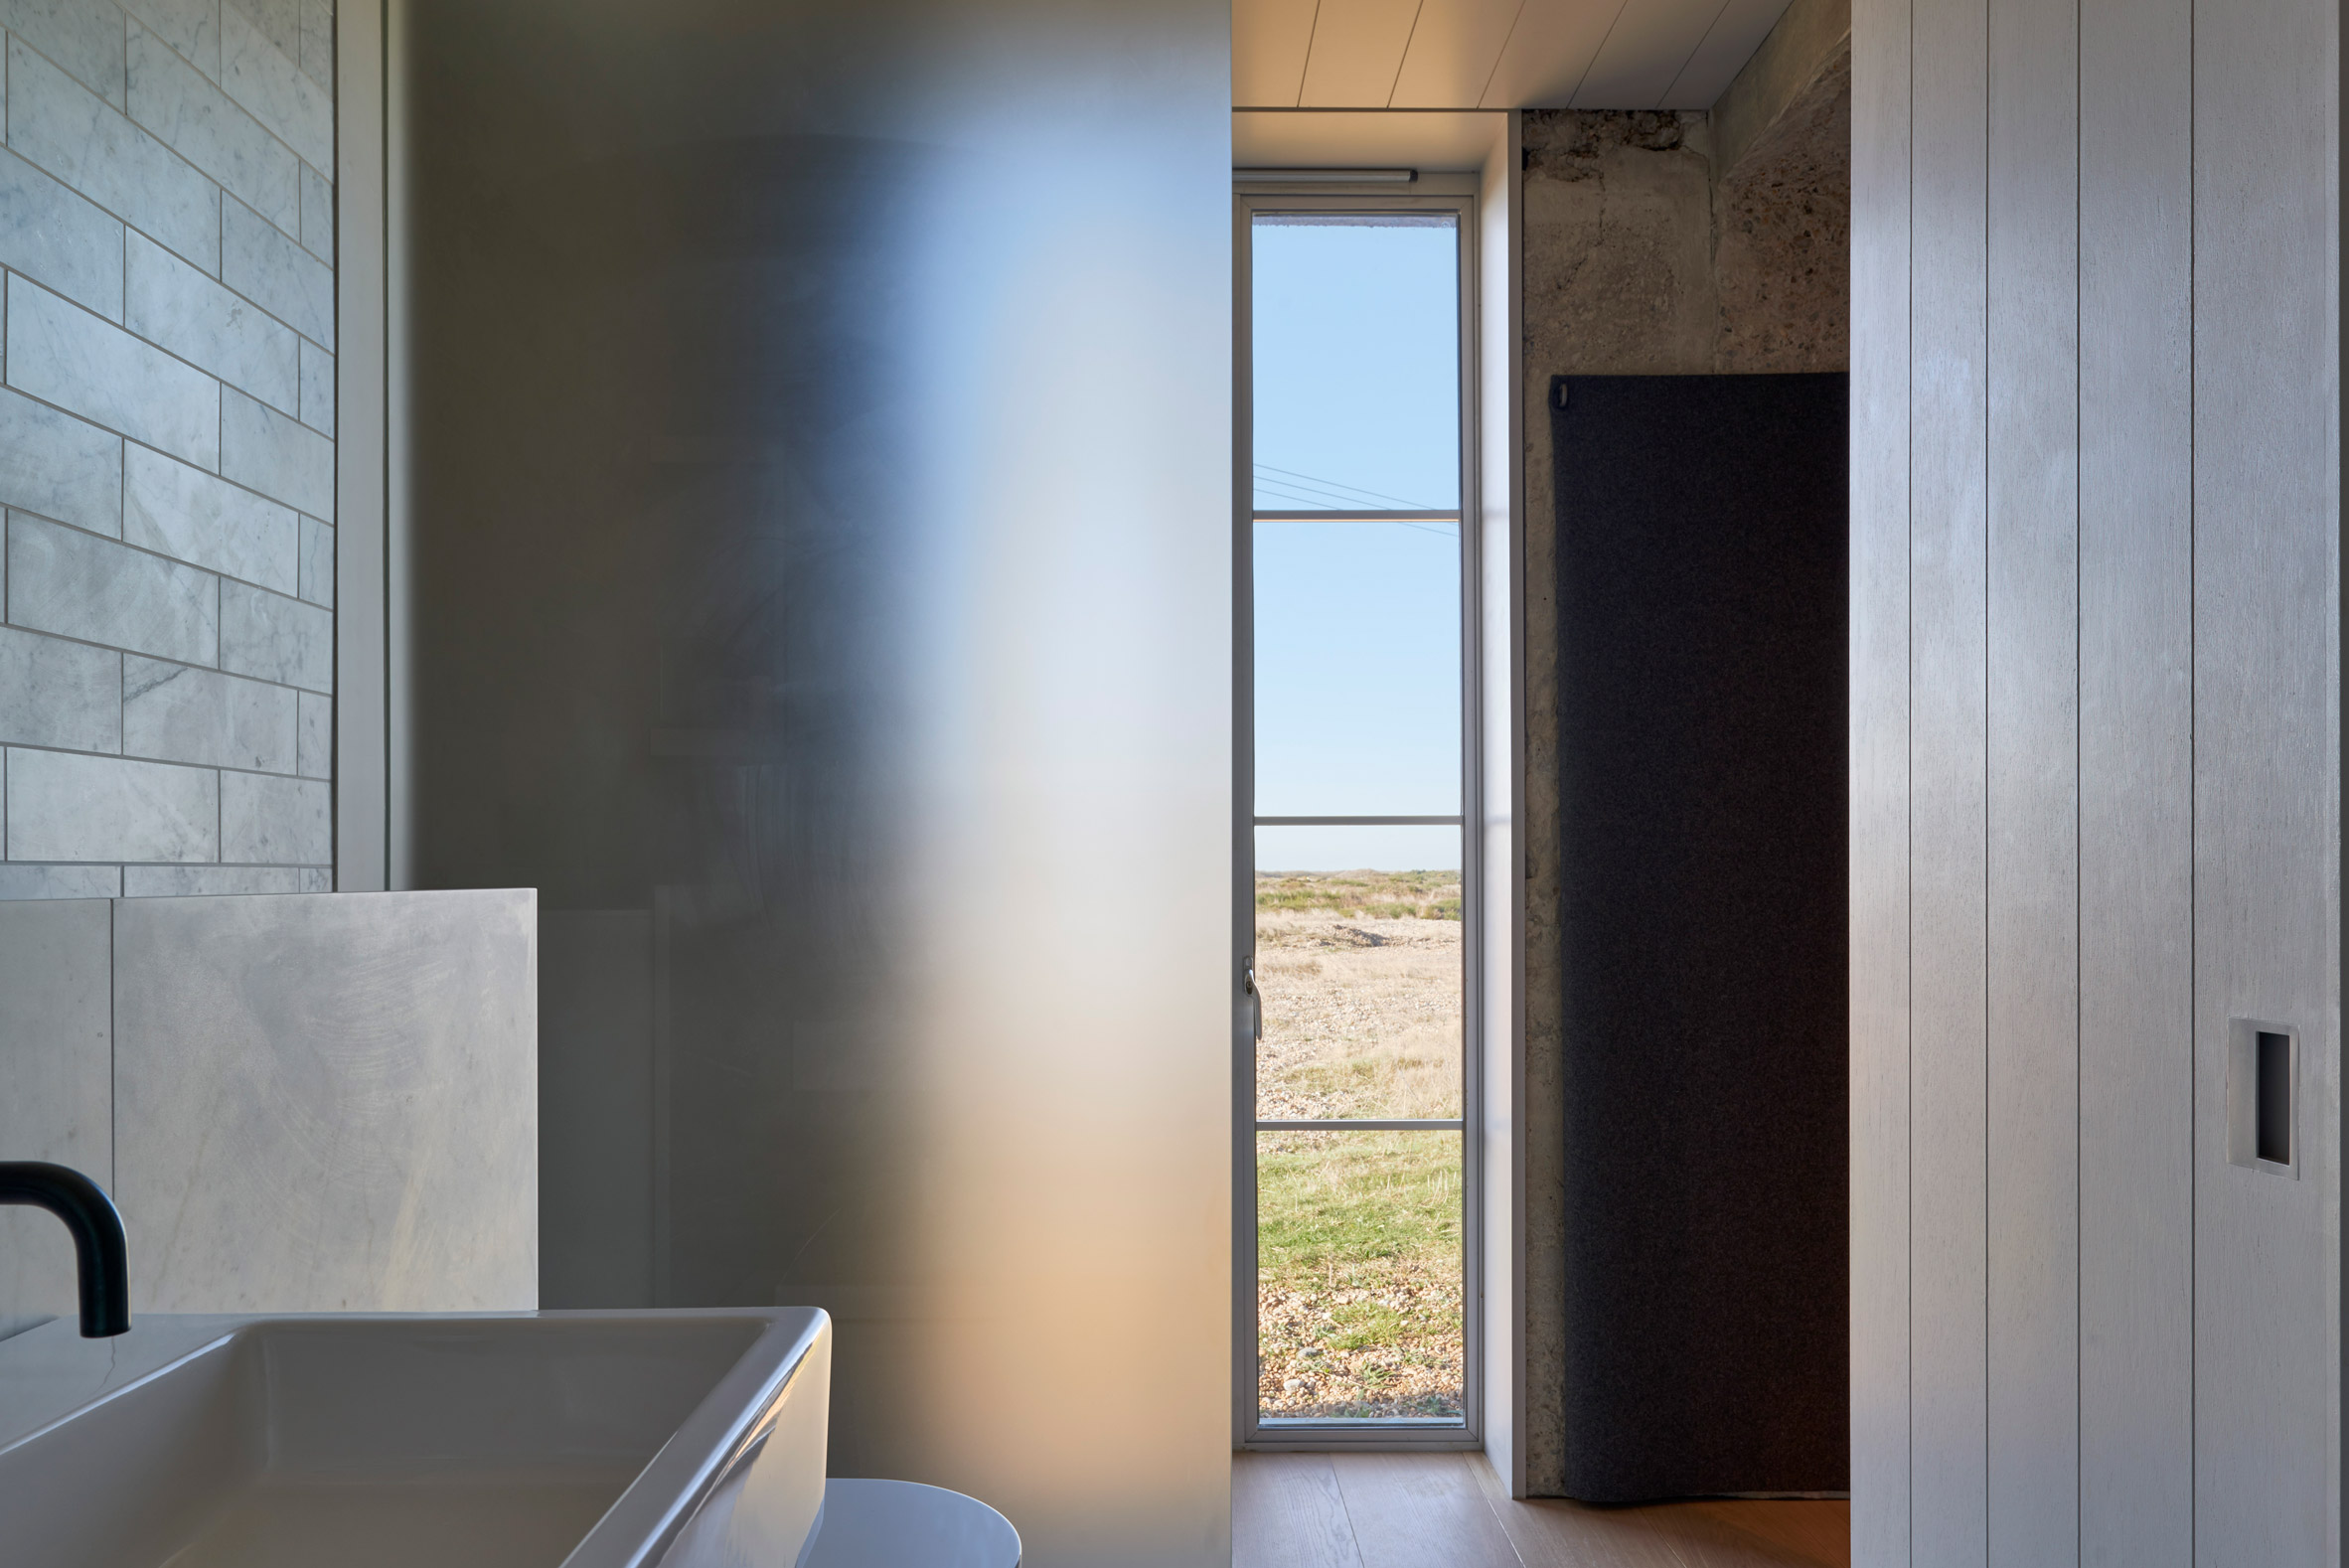 Johnson Naylor convert world war two pump station into Dungeness holiday home